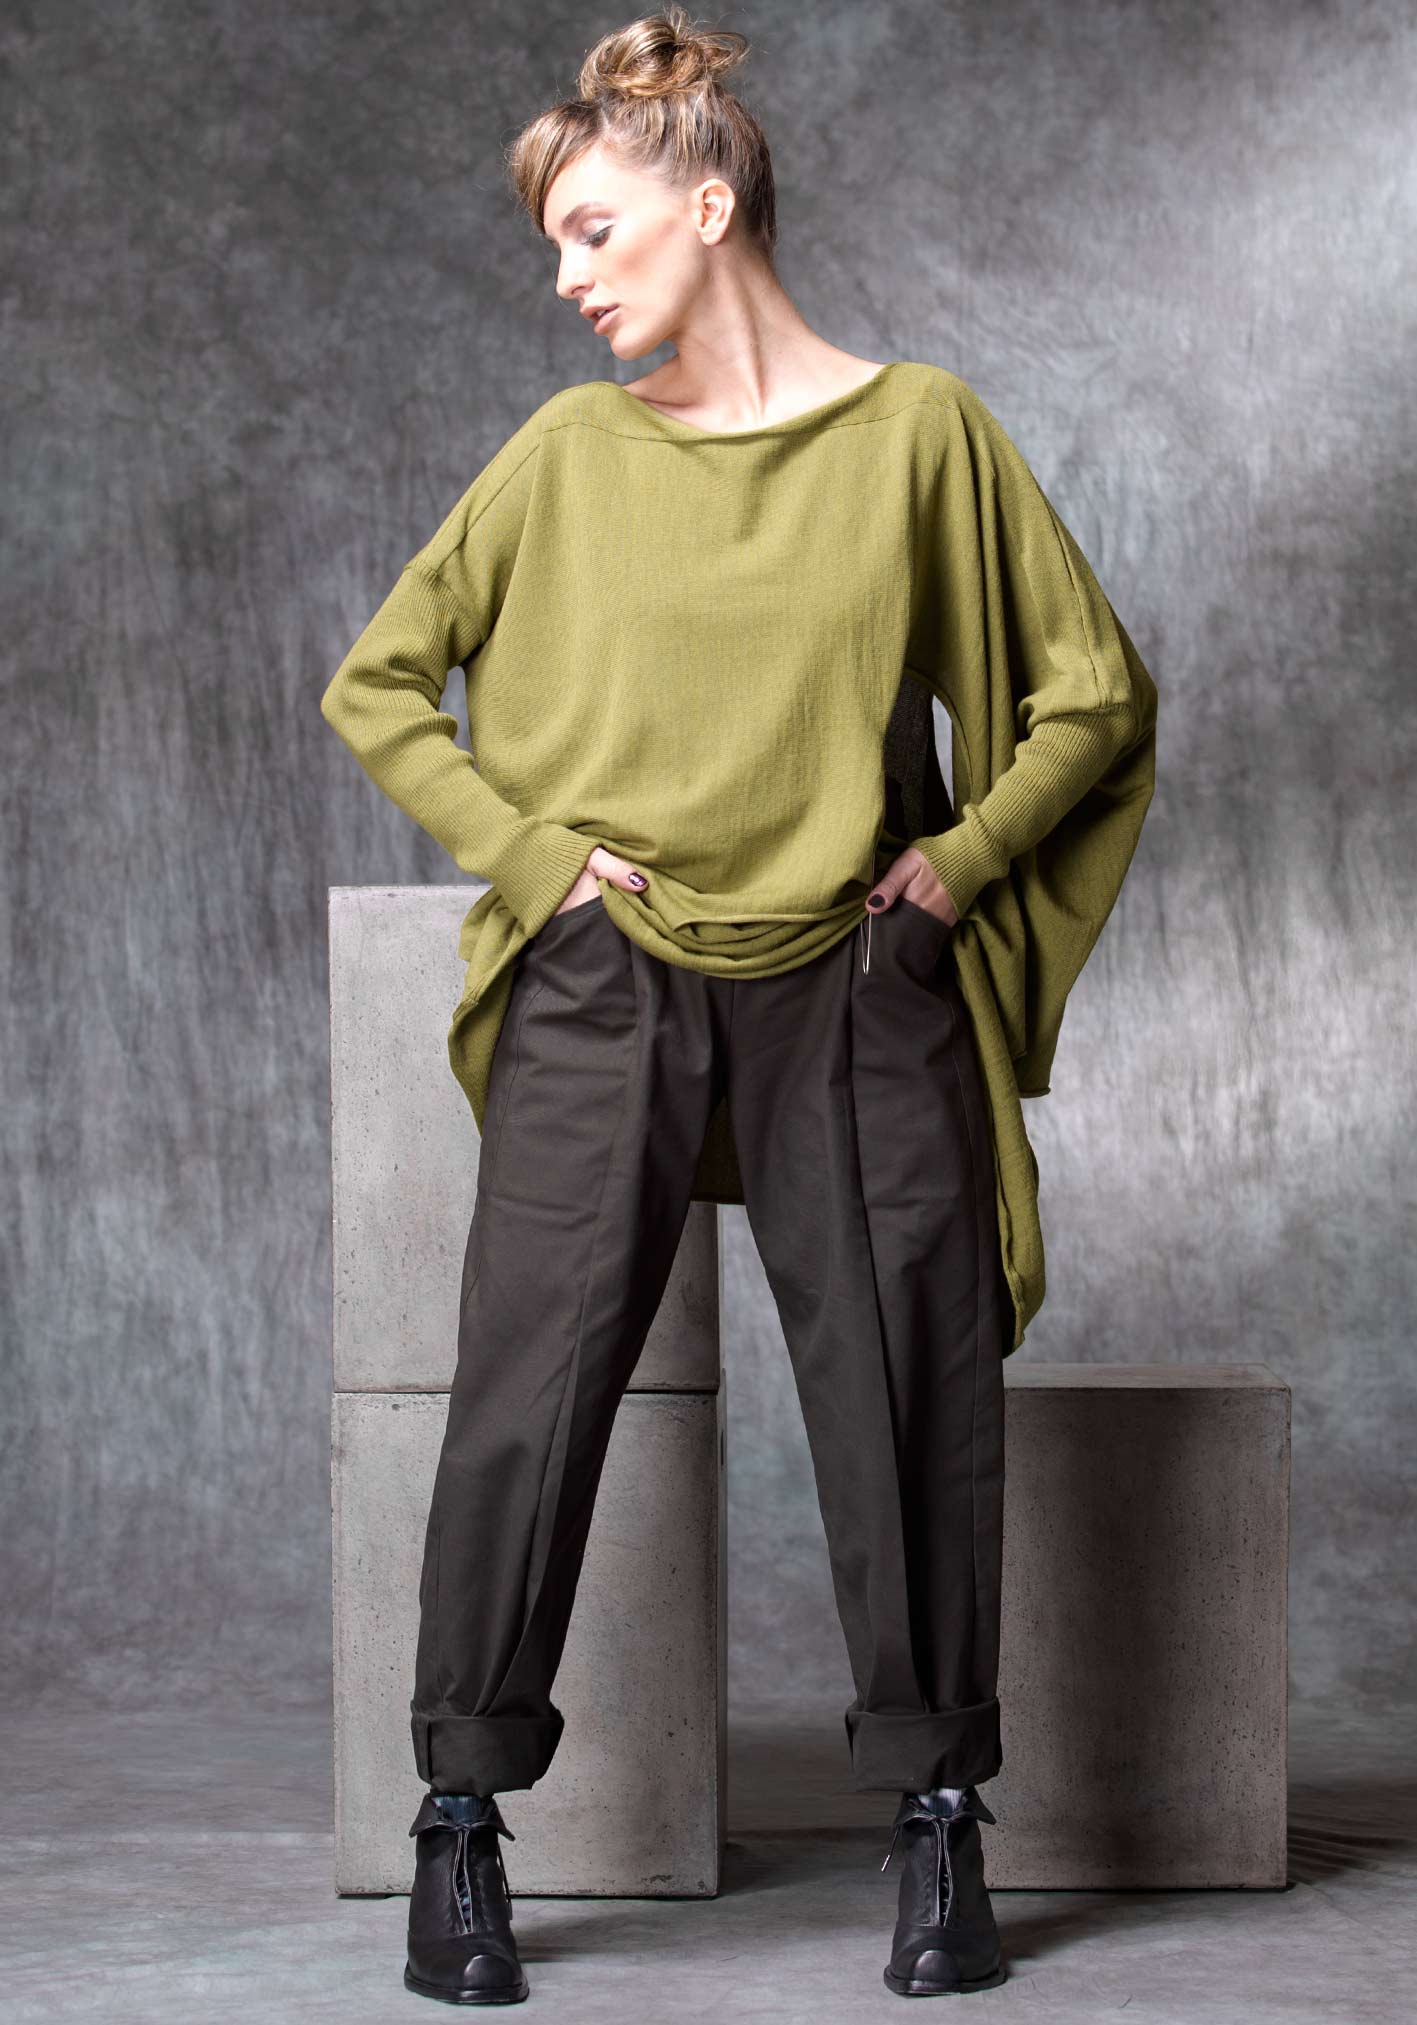 buy the latest Angle Pocket Pant (Cotton Spandex) online